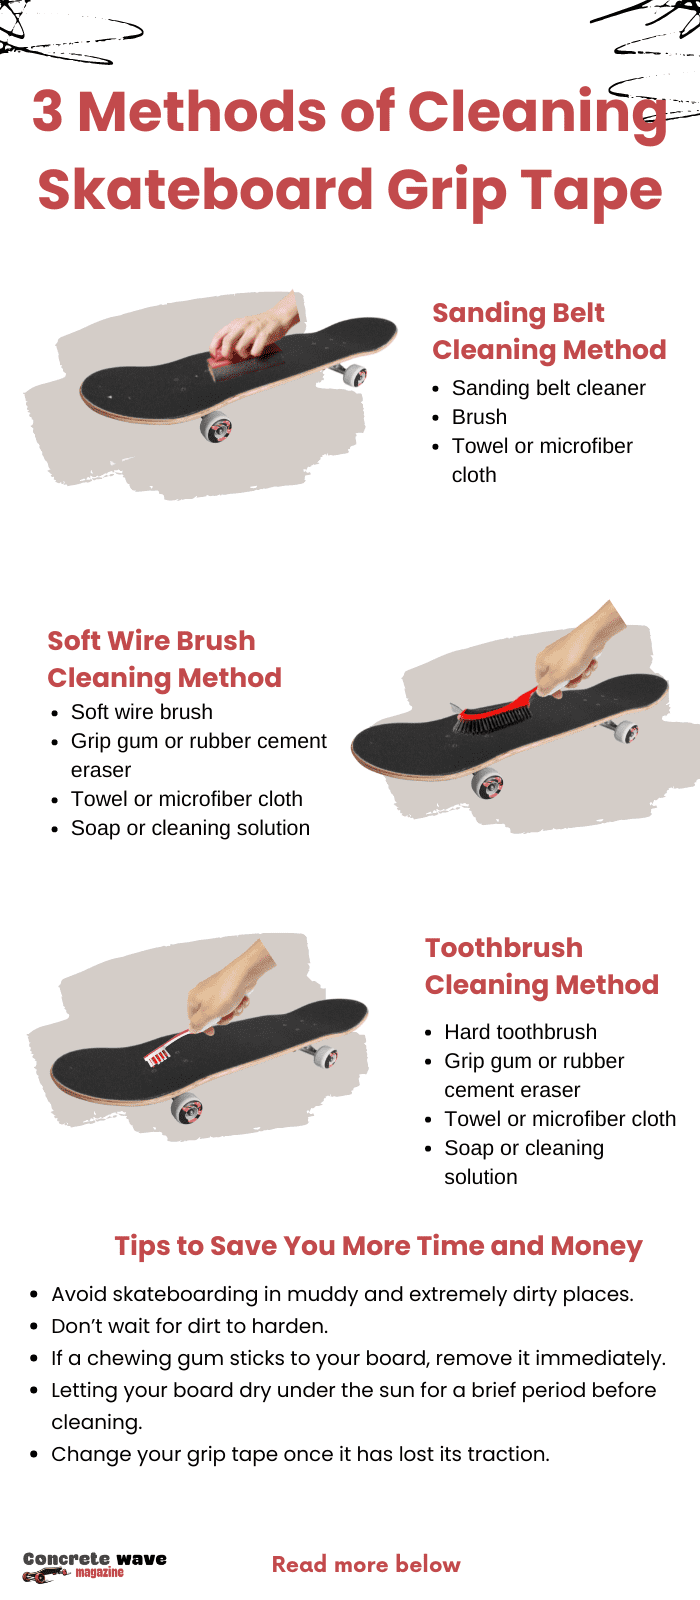 How To Clean Grip Tape: A Complete In-Depth Guide